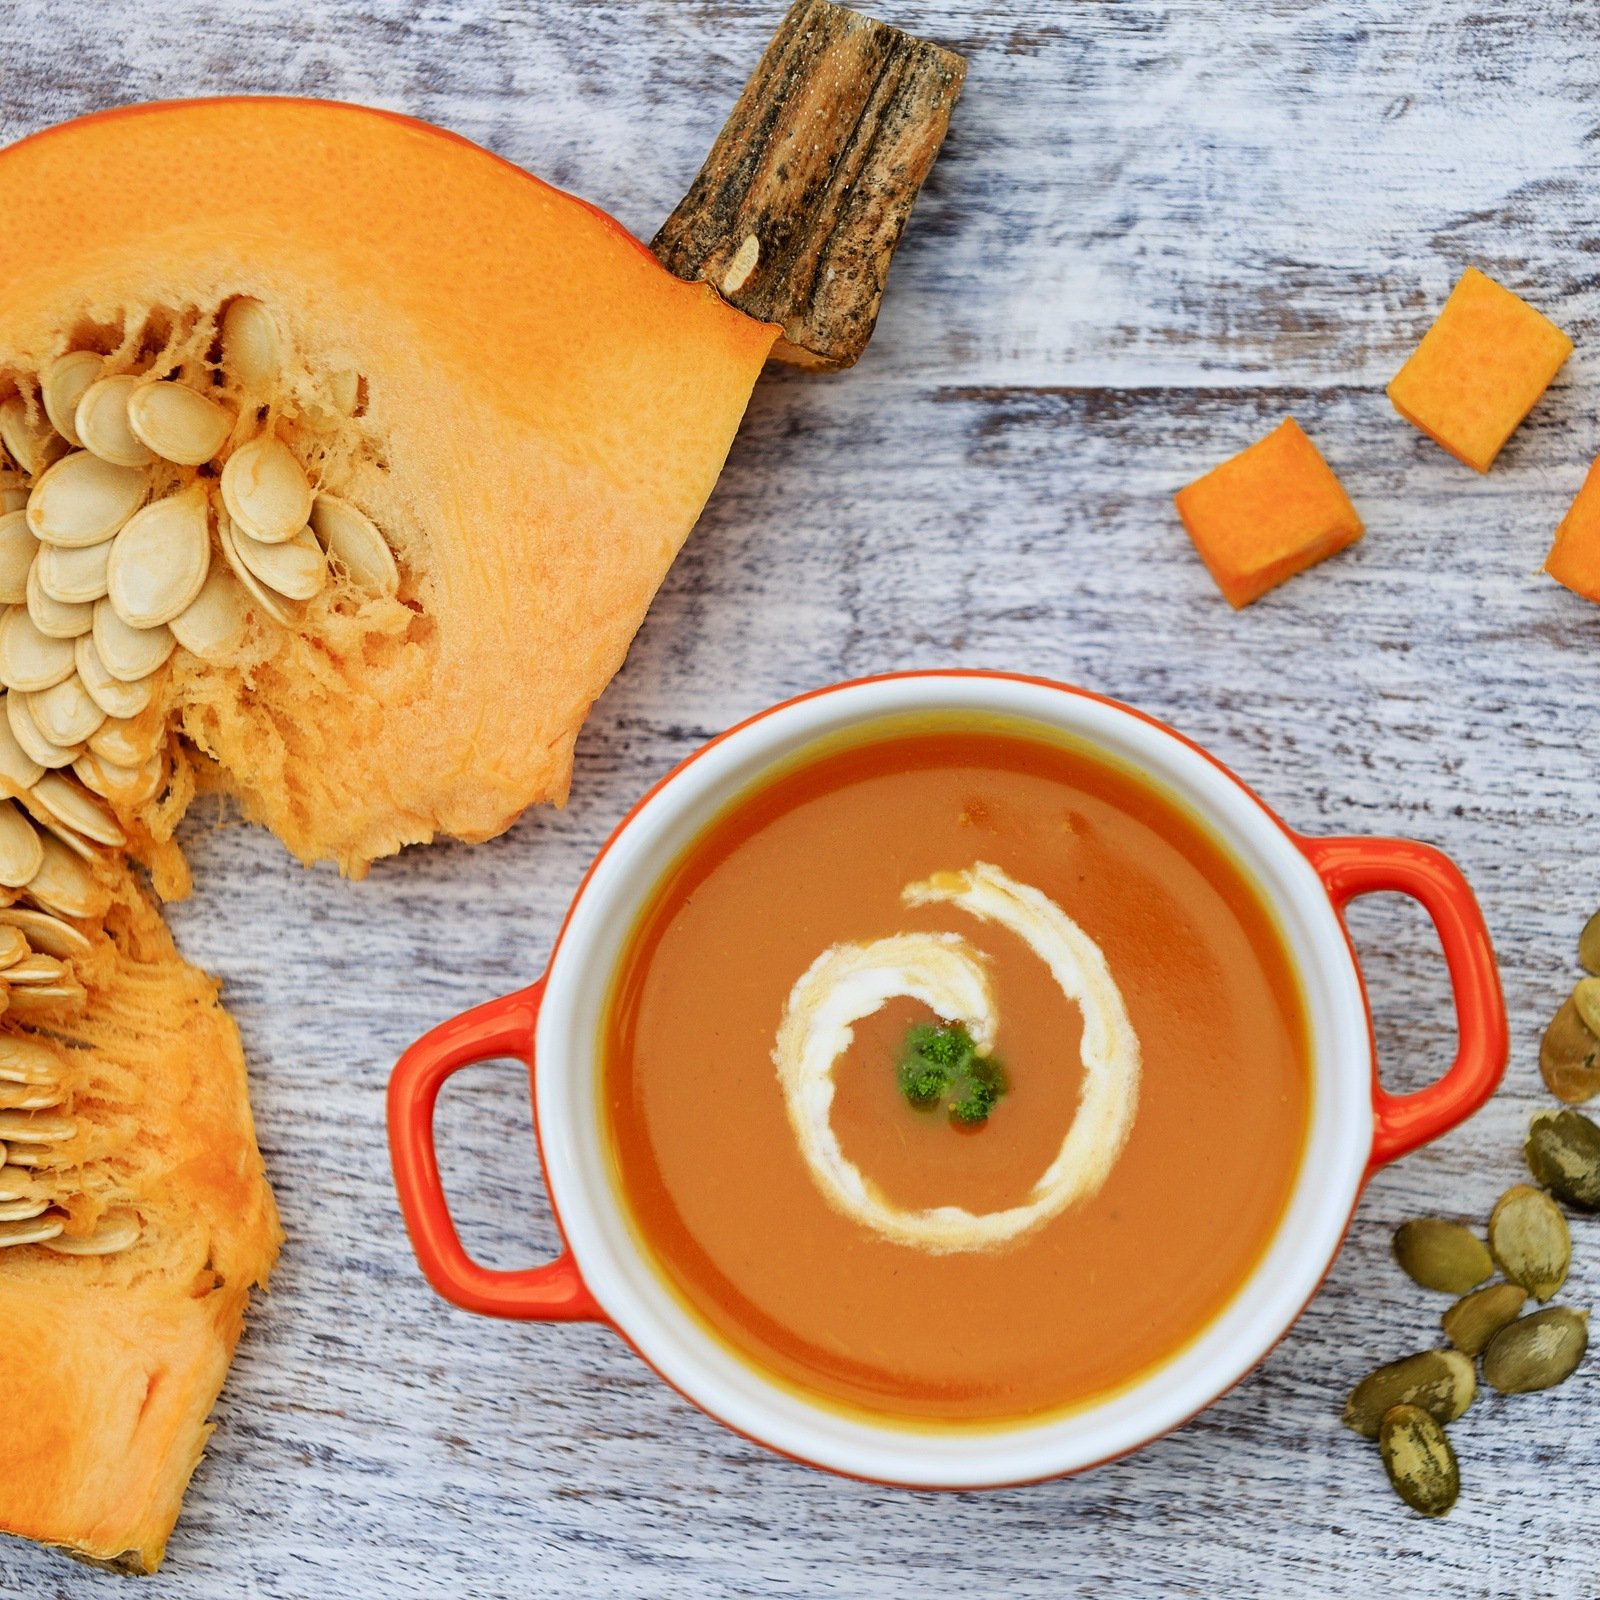 10 Health Benefits of Pumpkins You Didn’t Know (And 32 Creative Ways To Have Pumpkin)